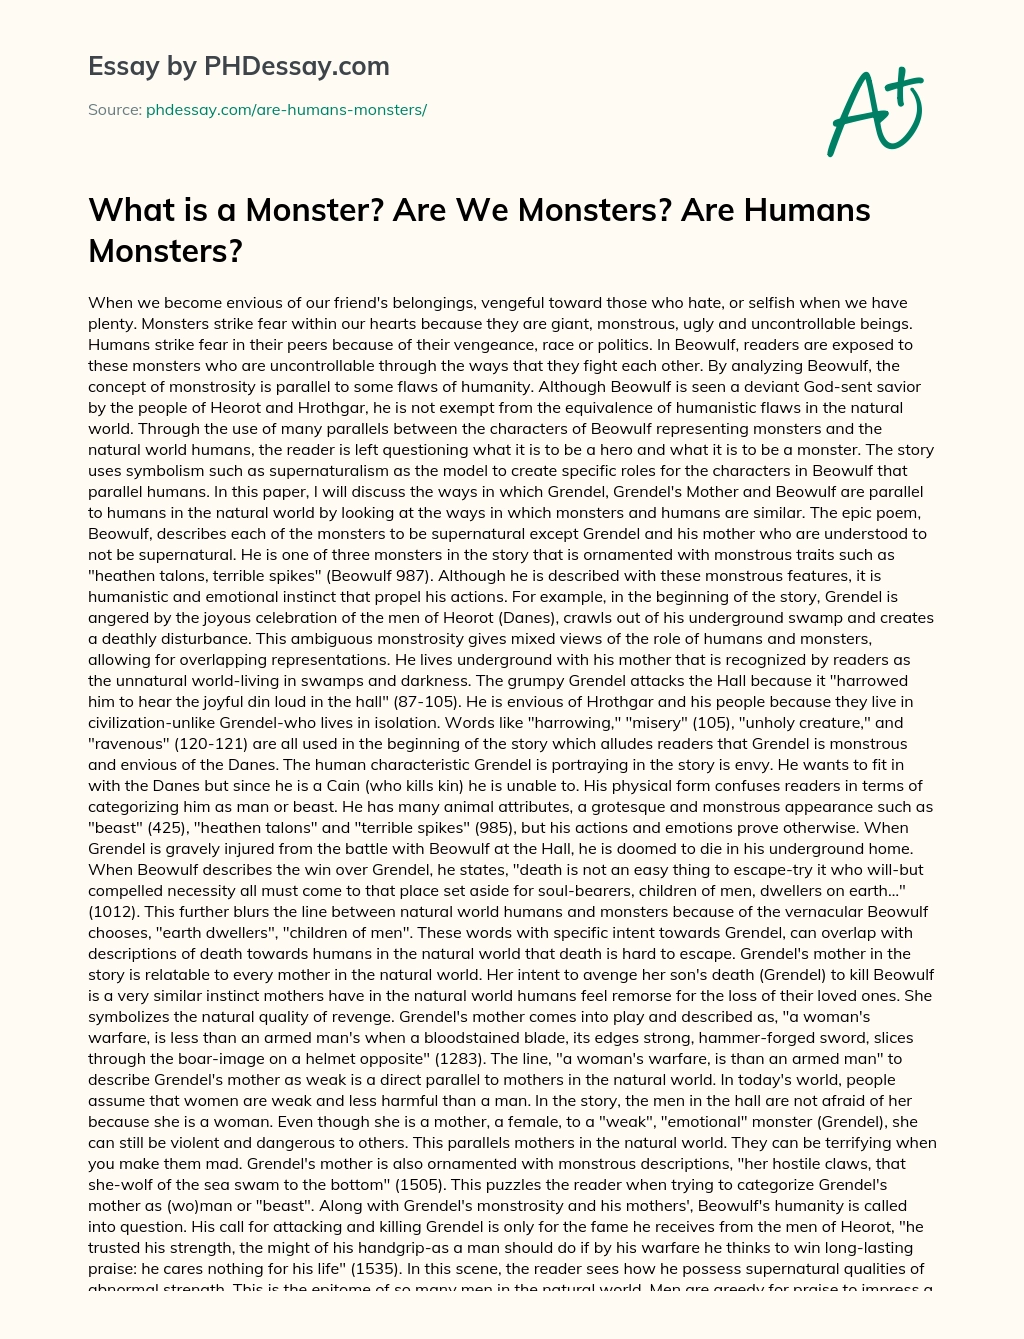 What is a Monster? Are We Monsters? Are Humans Monsters? essay